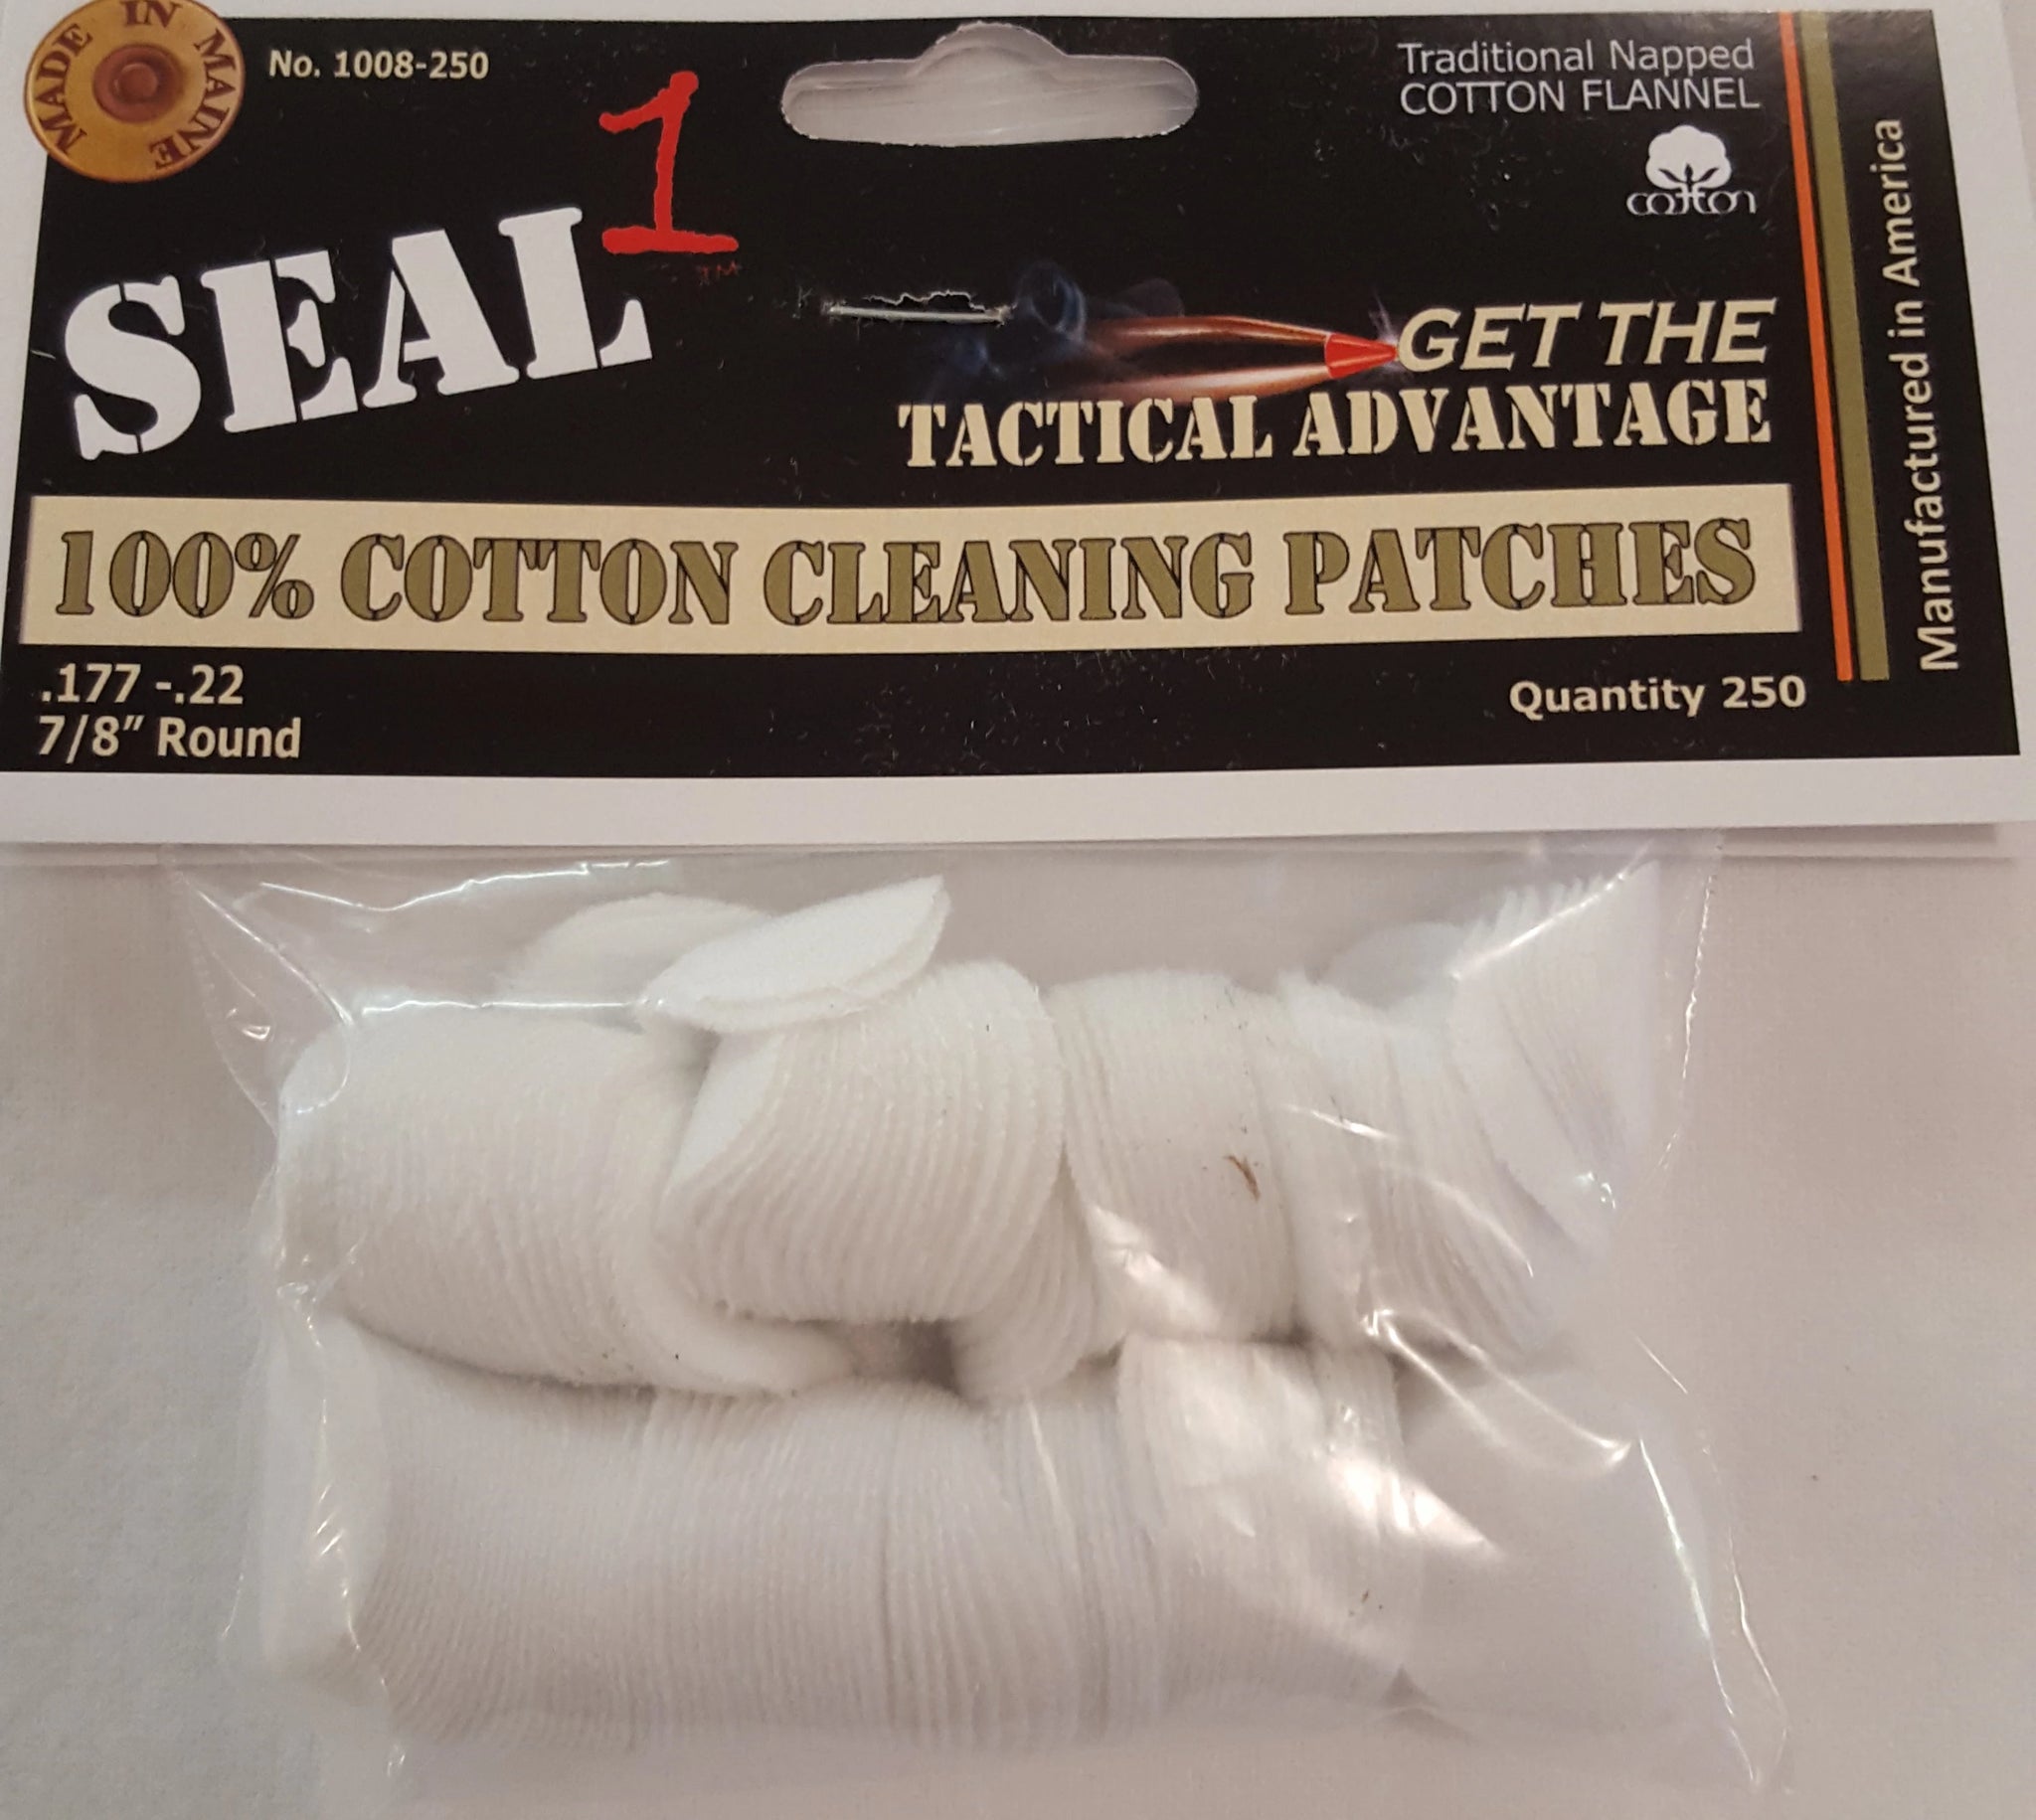 .177-.22 7/8" 100% Cotton Cleaning Patches Bag of 250